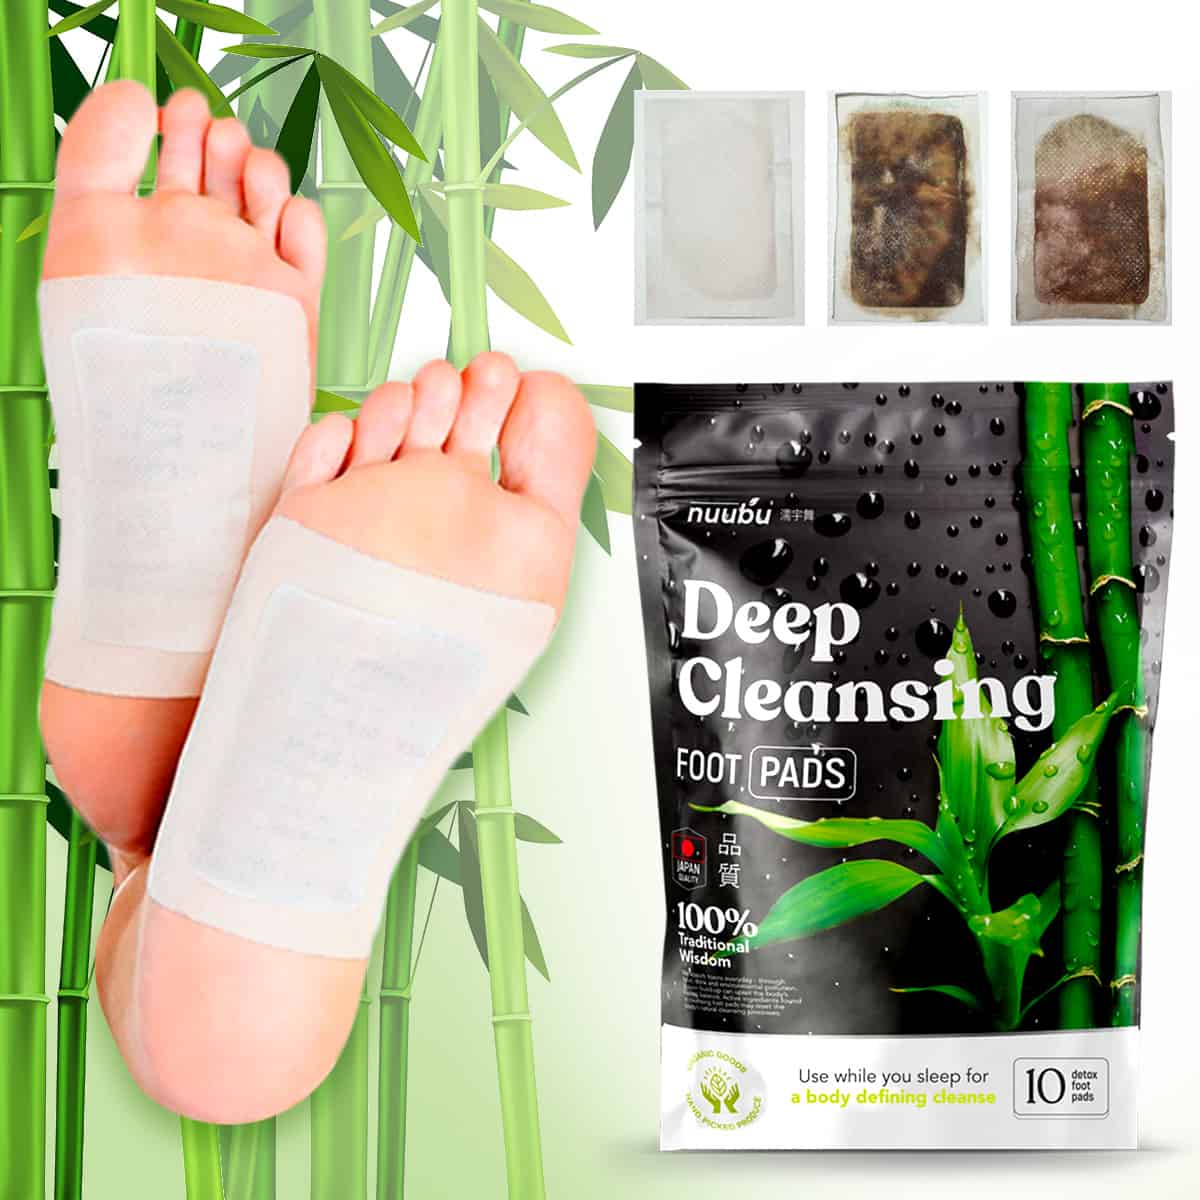 Foot pads for foot pain relief